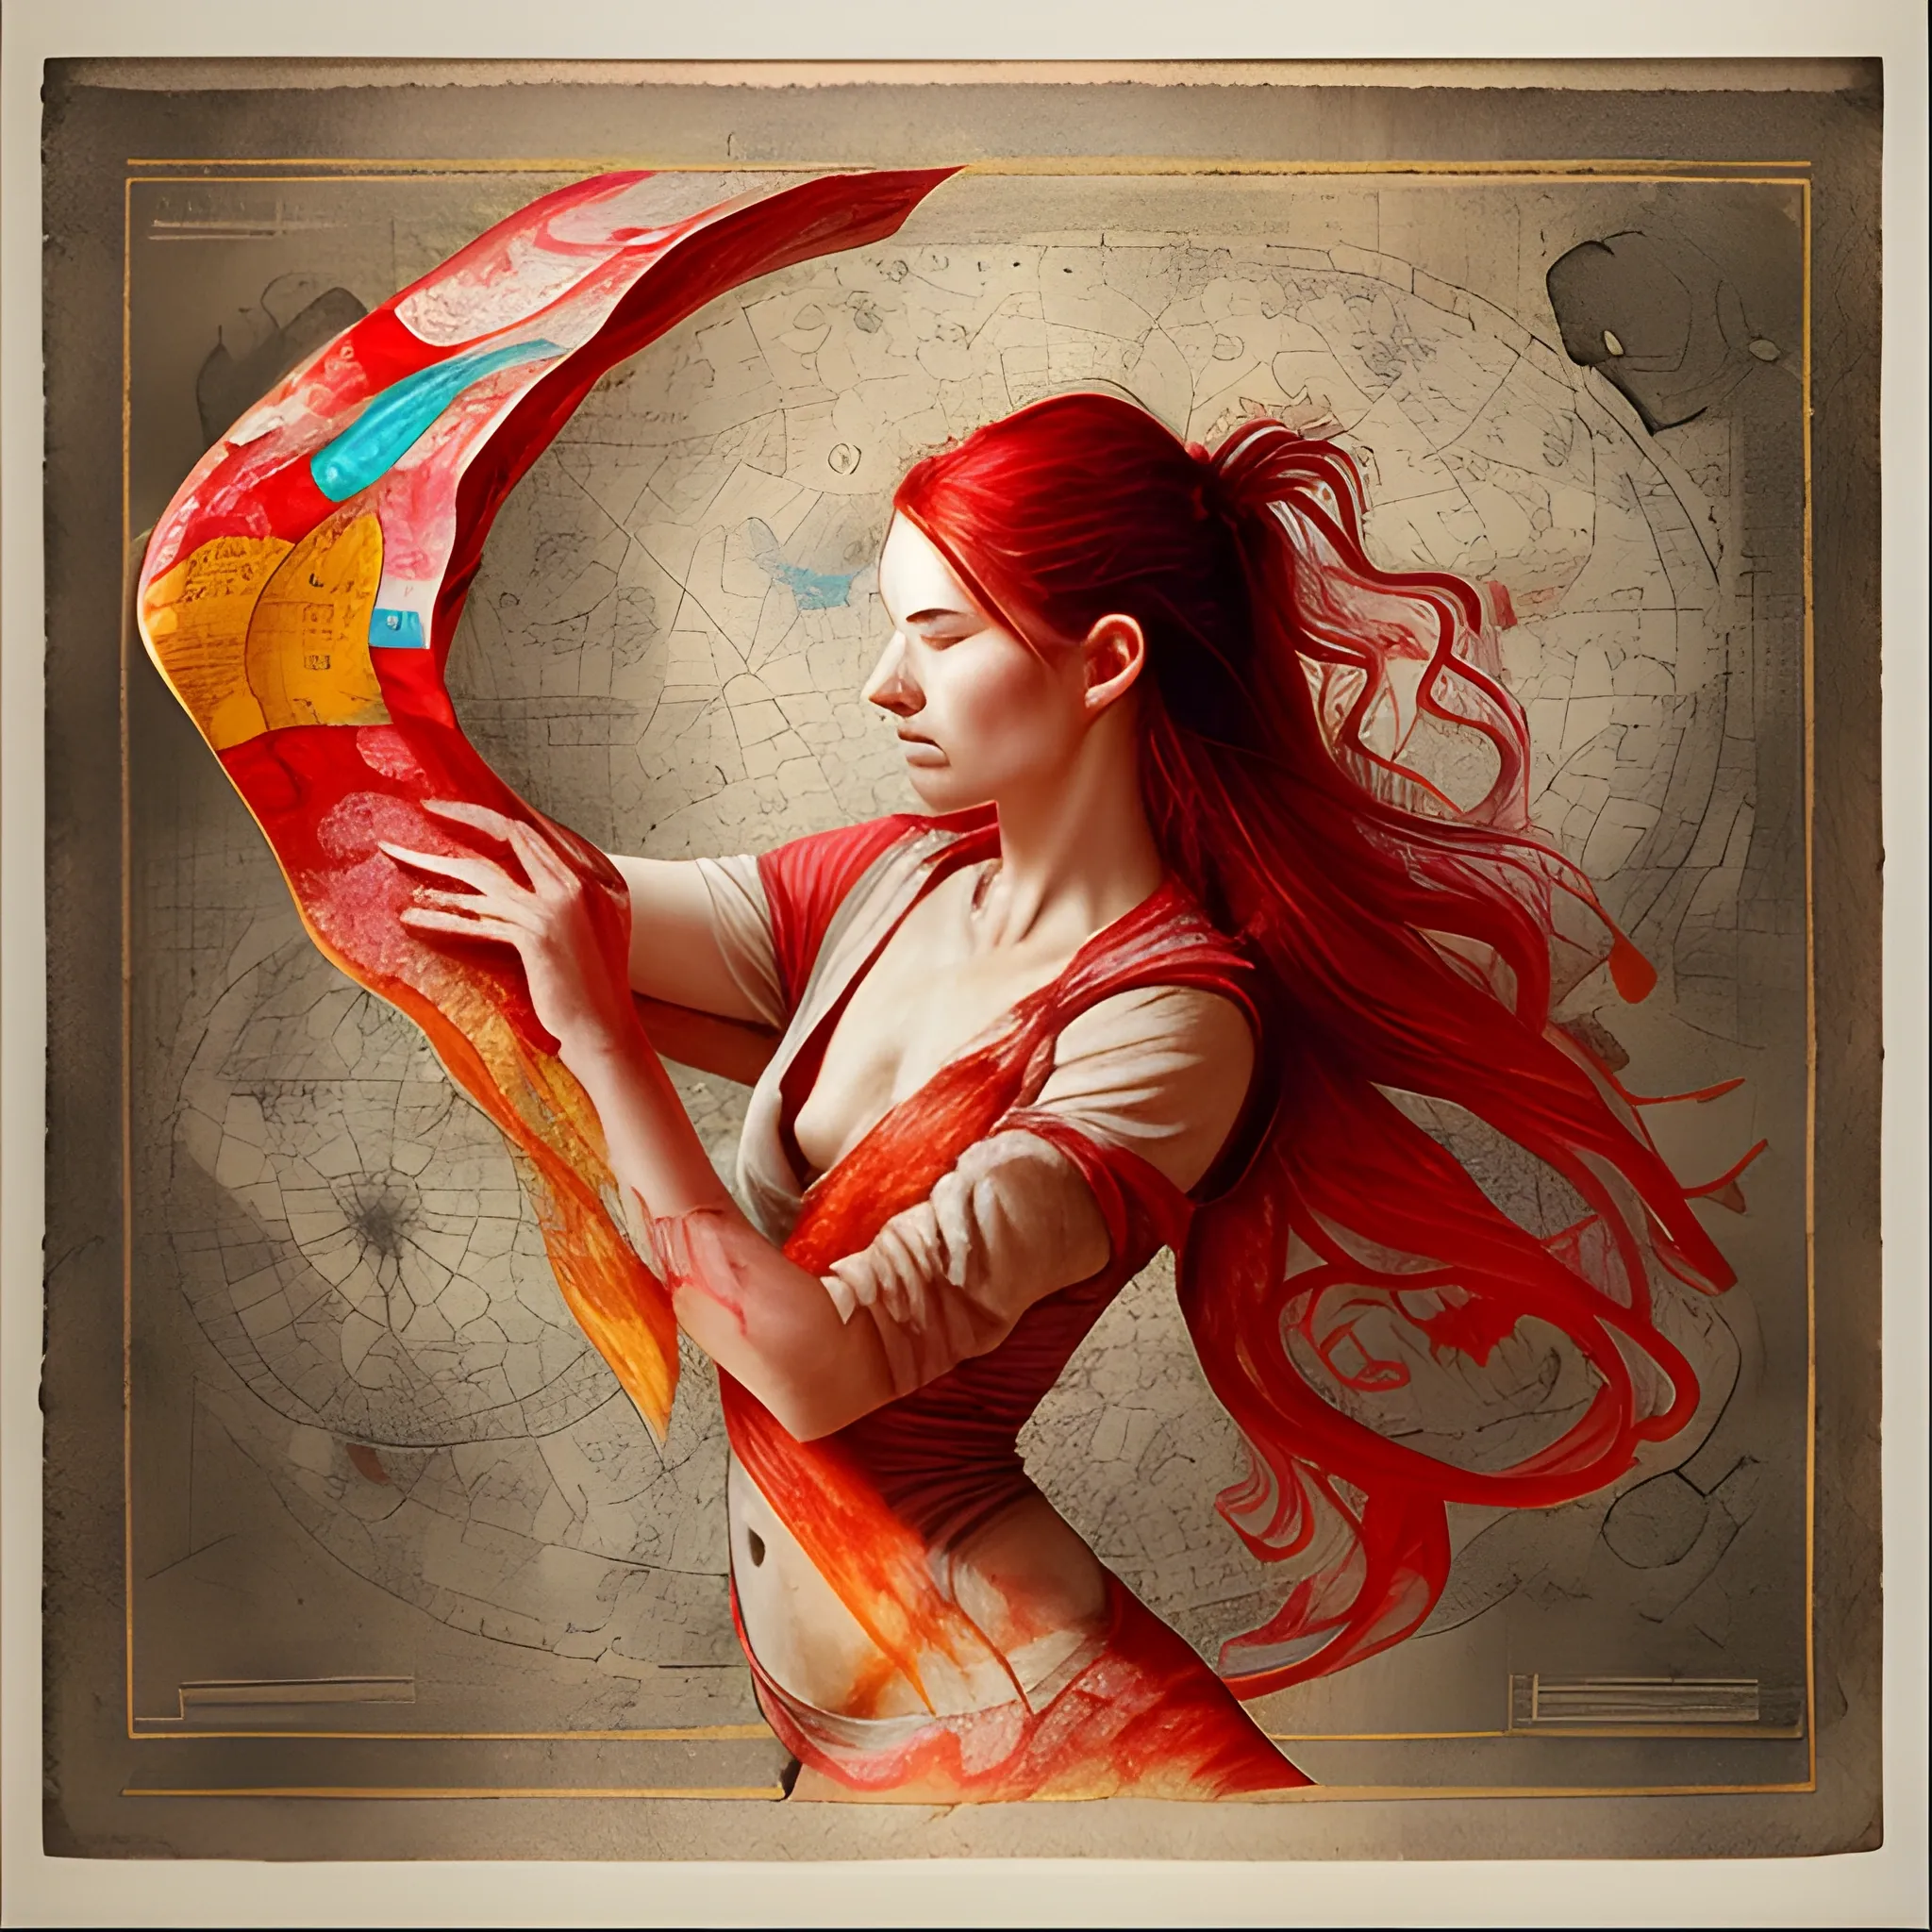 Generate an artistic depiction of a dynamic woman unrolling an ancient treasure map with a red watercolor technique. She should exude energy, with a determined yet empty gaze fixed on the map as she endeavors to decipher its hidden secrets. The artwork should capture the fine details of the map and convey the contrasting emotions of determination and uncertainty in her expression. Transport the viewer into this vibrant and mysterious world through your artwork